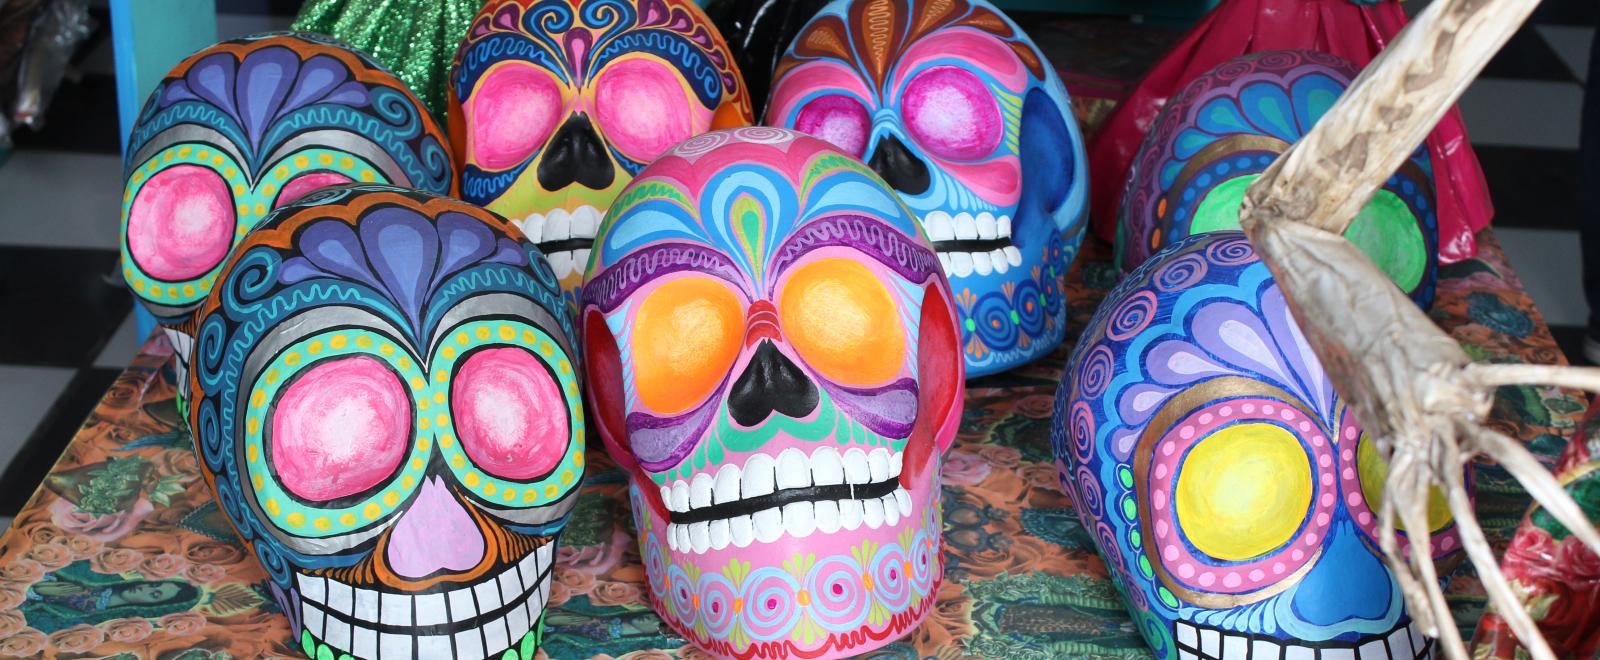 A sugar skull hand painted and on sale at a market in Mexico.